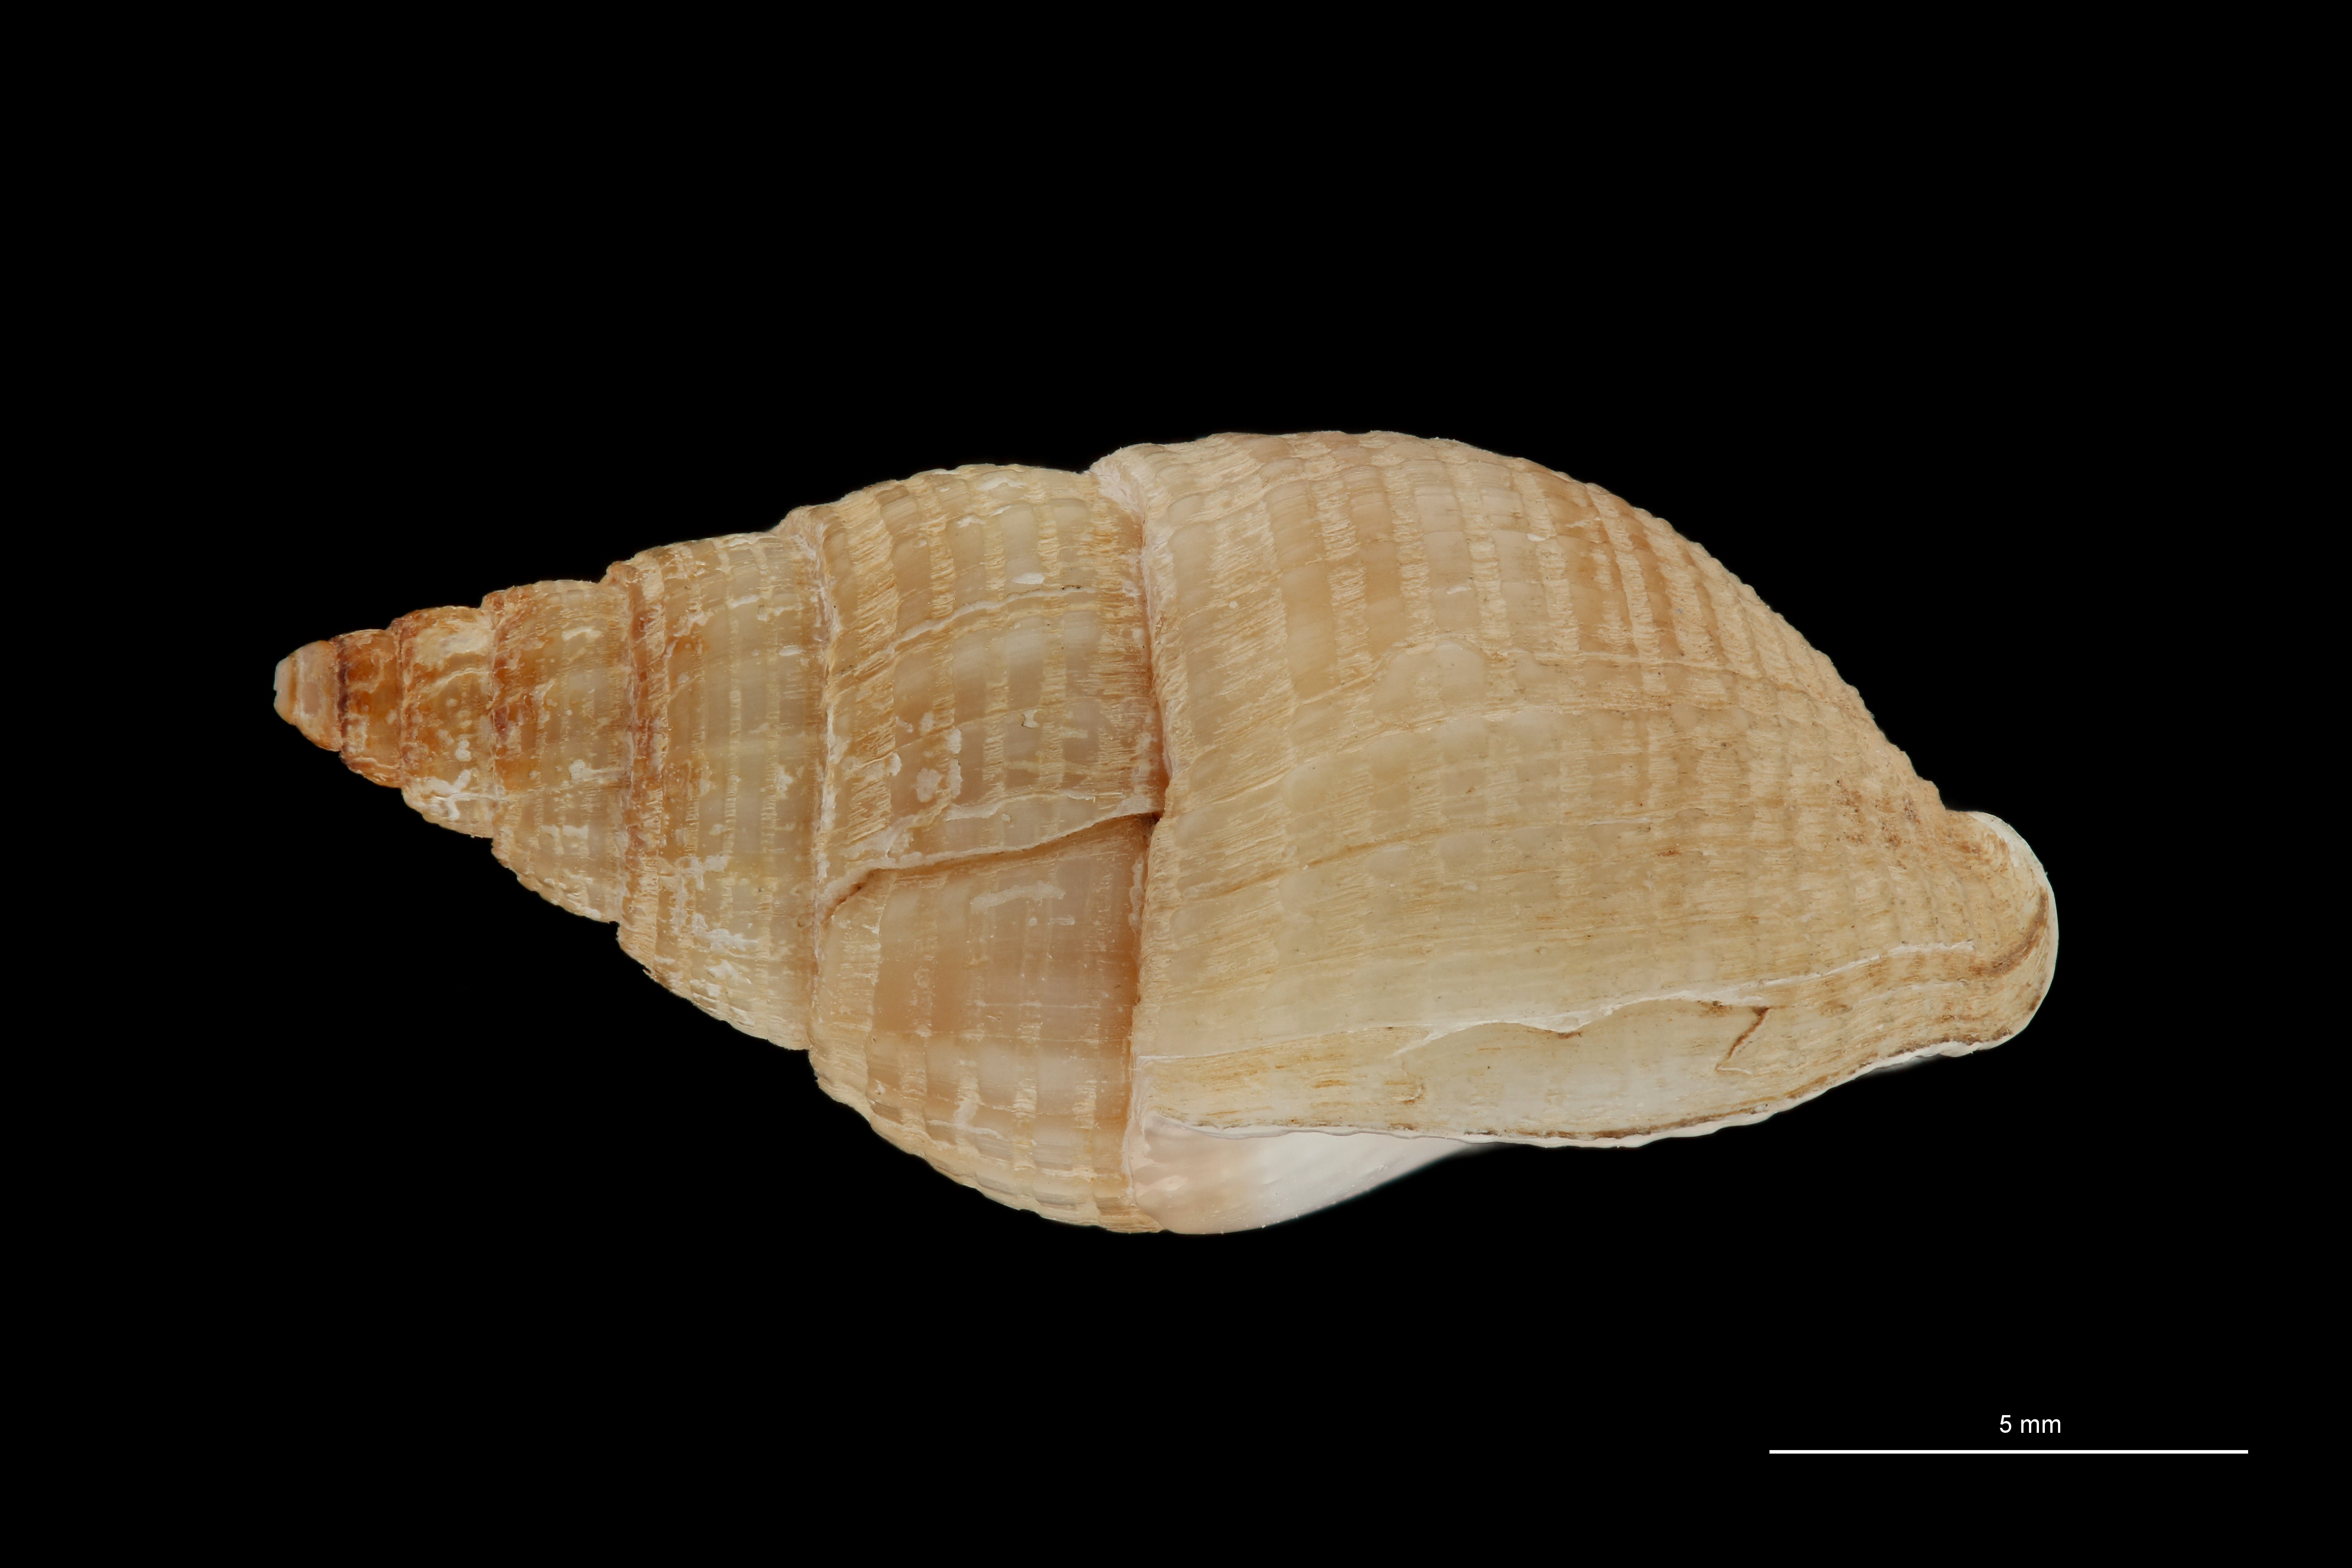 BE-RBINS-INV HYPOTYPE MT 235 Nassarius cabrierensis ovoideus LATERAL ZS PMax Scaled.jpg